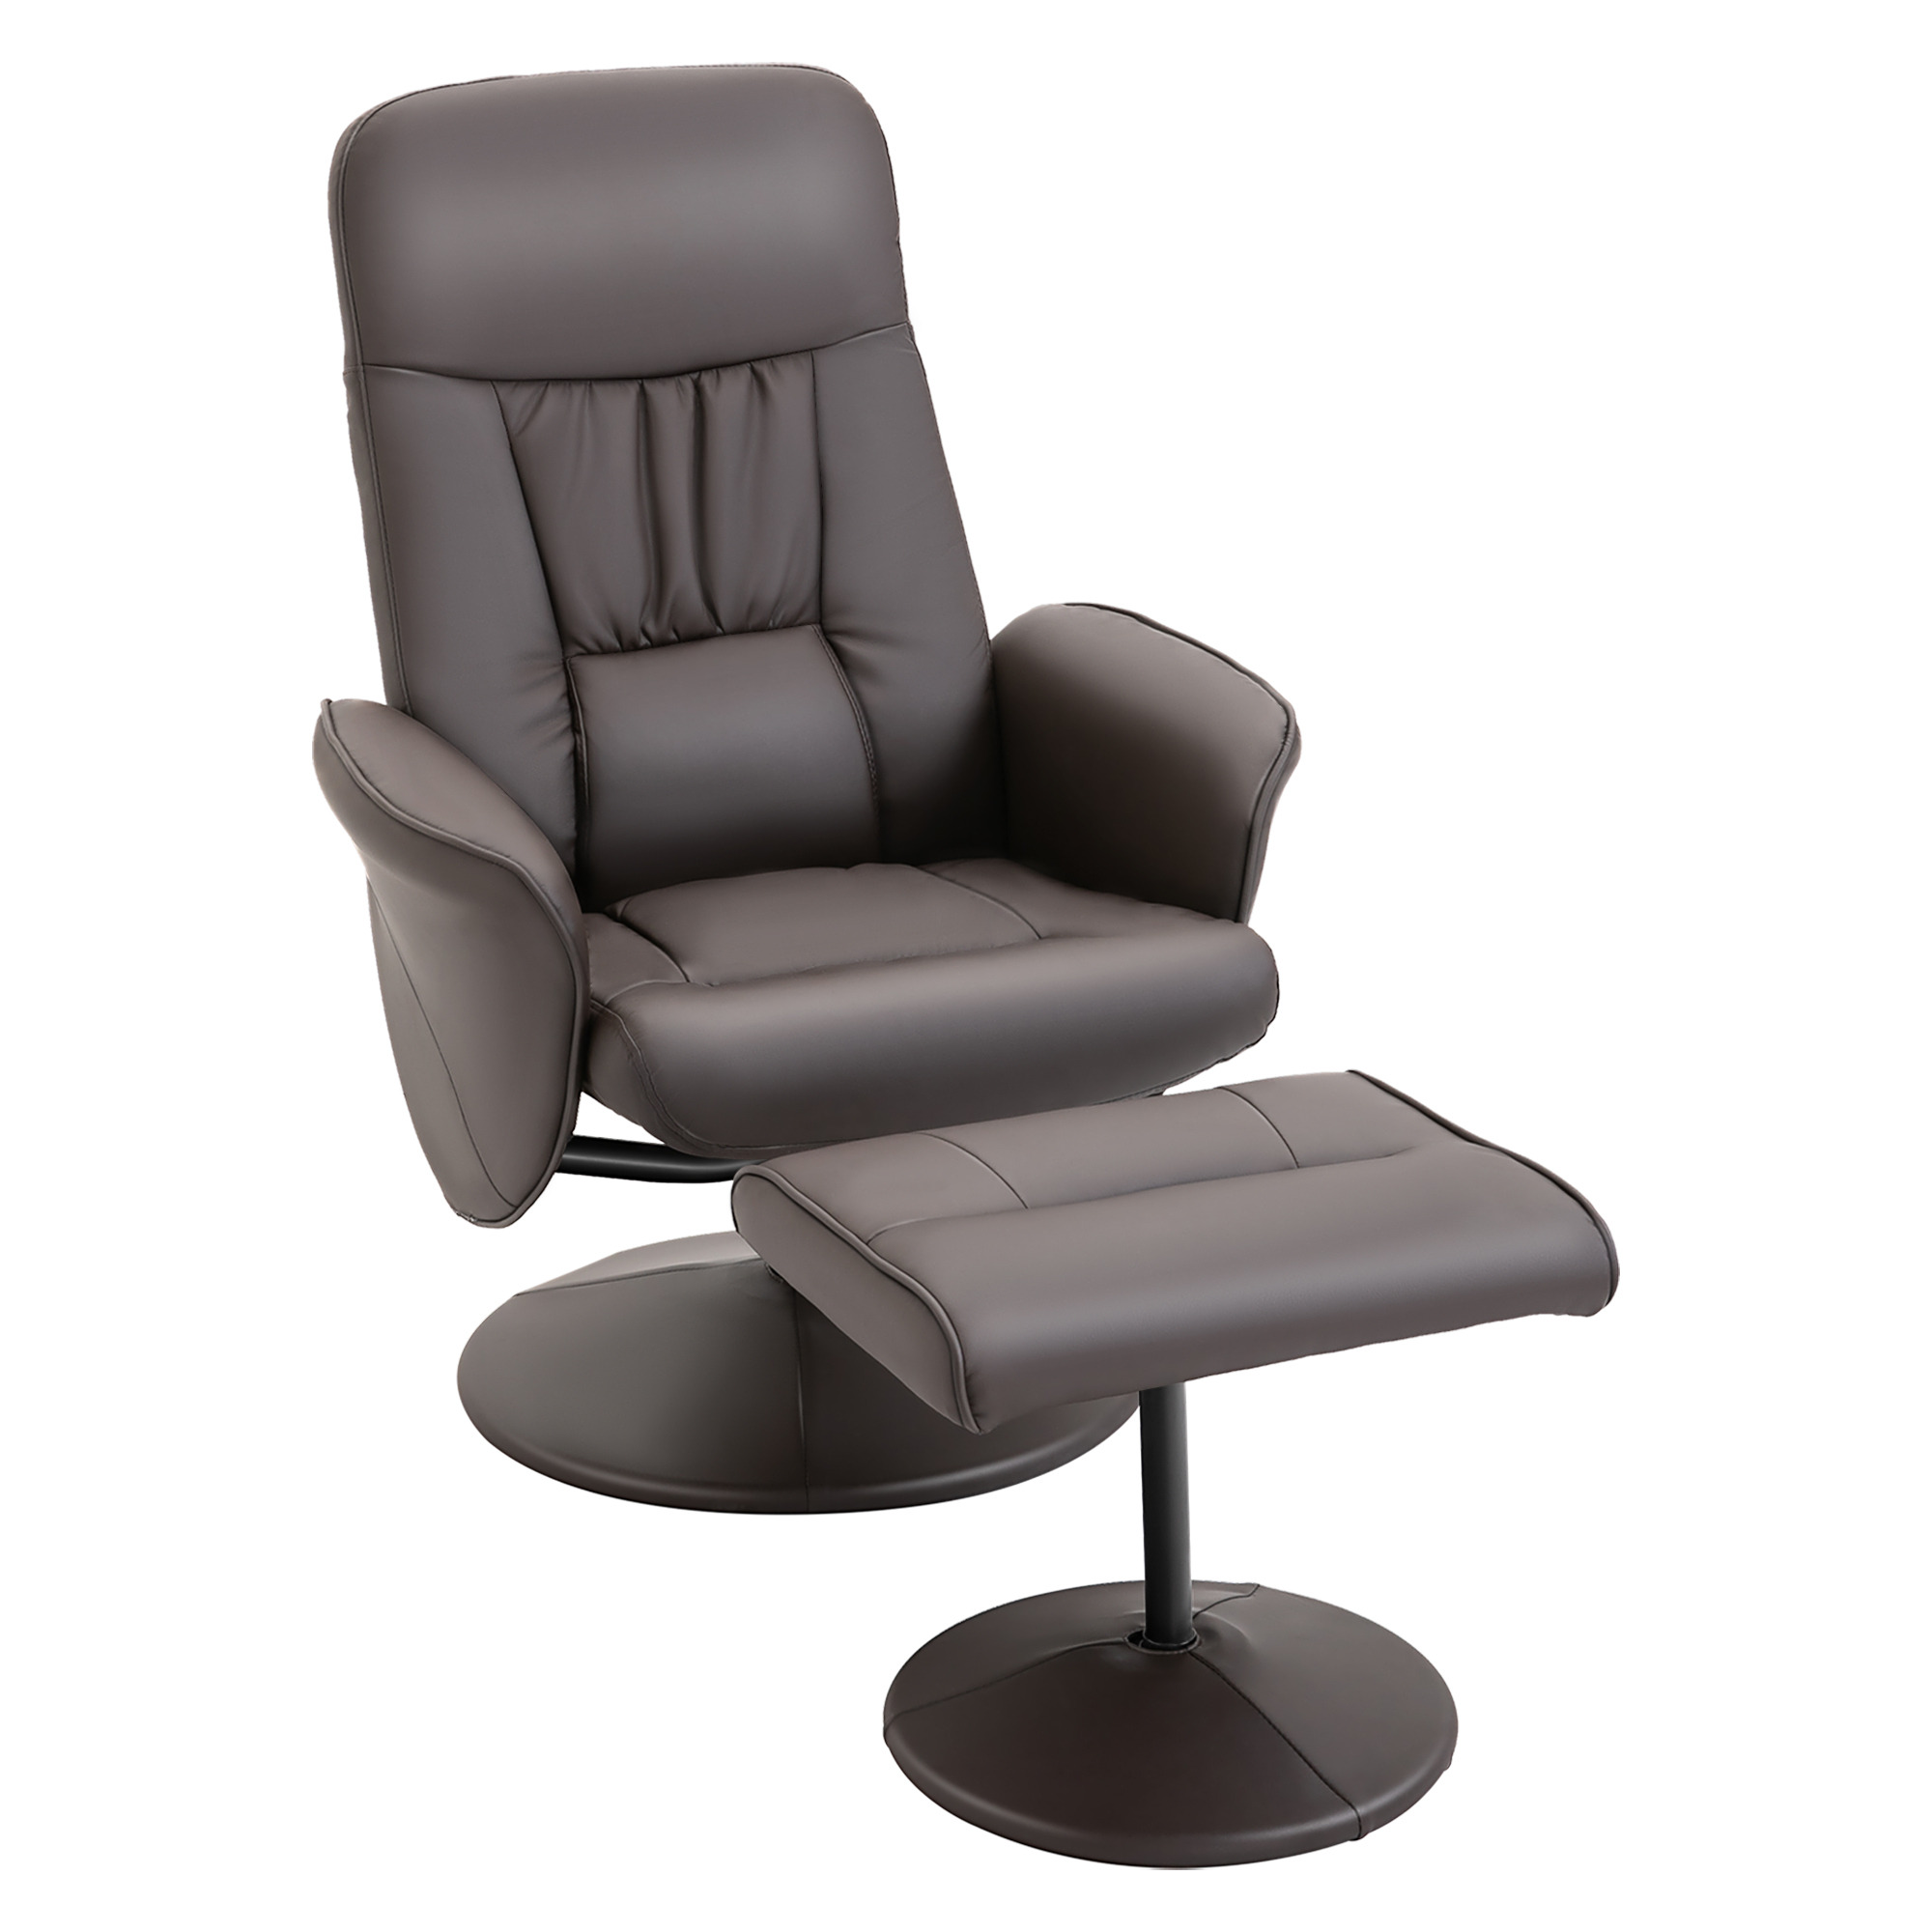 HOMCOM Executive Recliner Chair High Back and Footstool Armchair Lounge Seat Brown